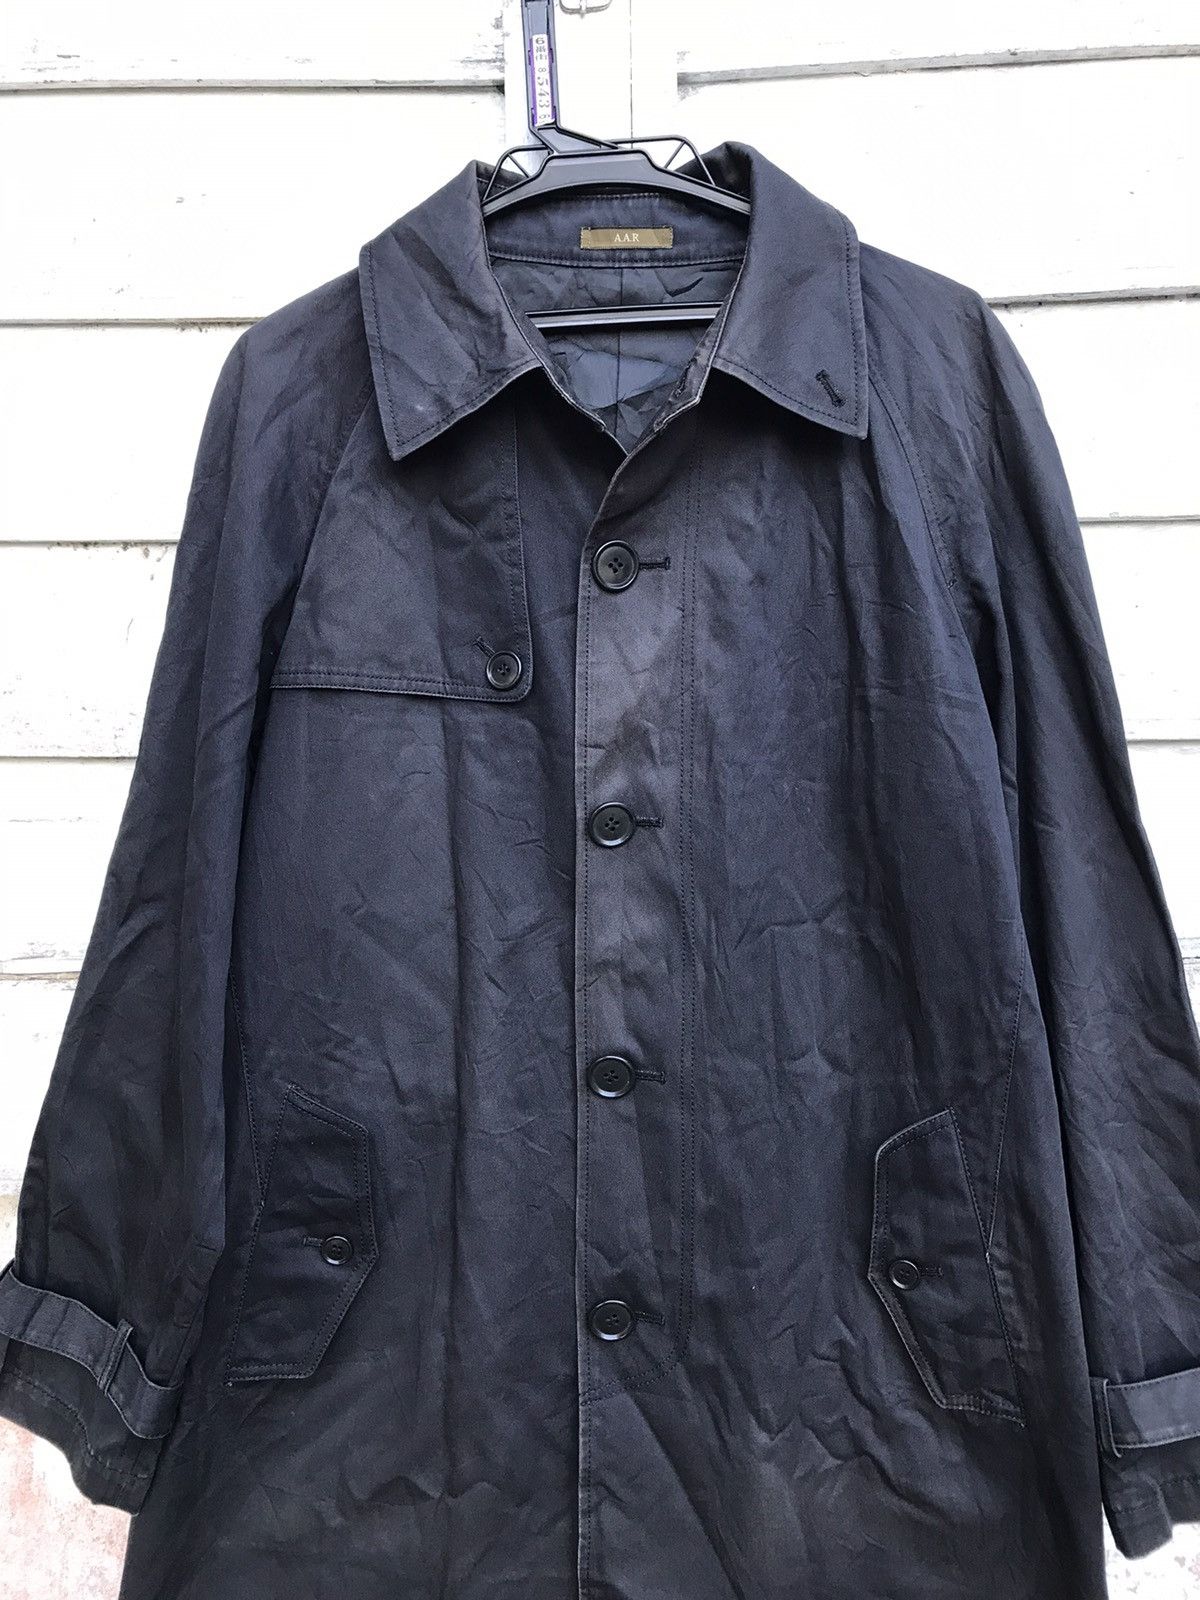 Yohji Yamamoto Against All Risk (A.R.R )Trench Coat - 4